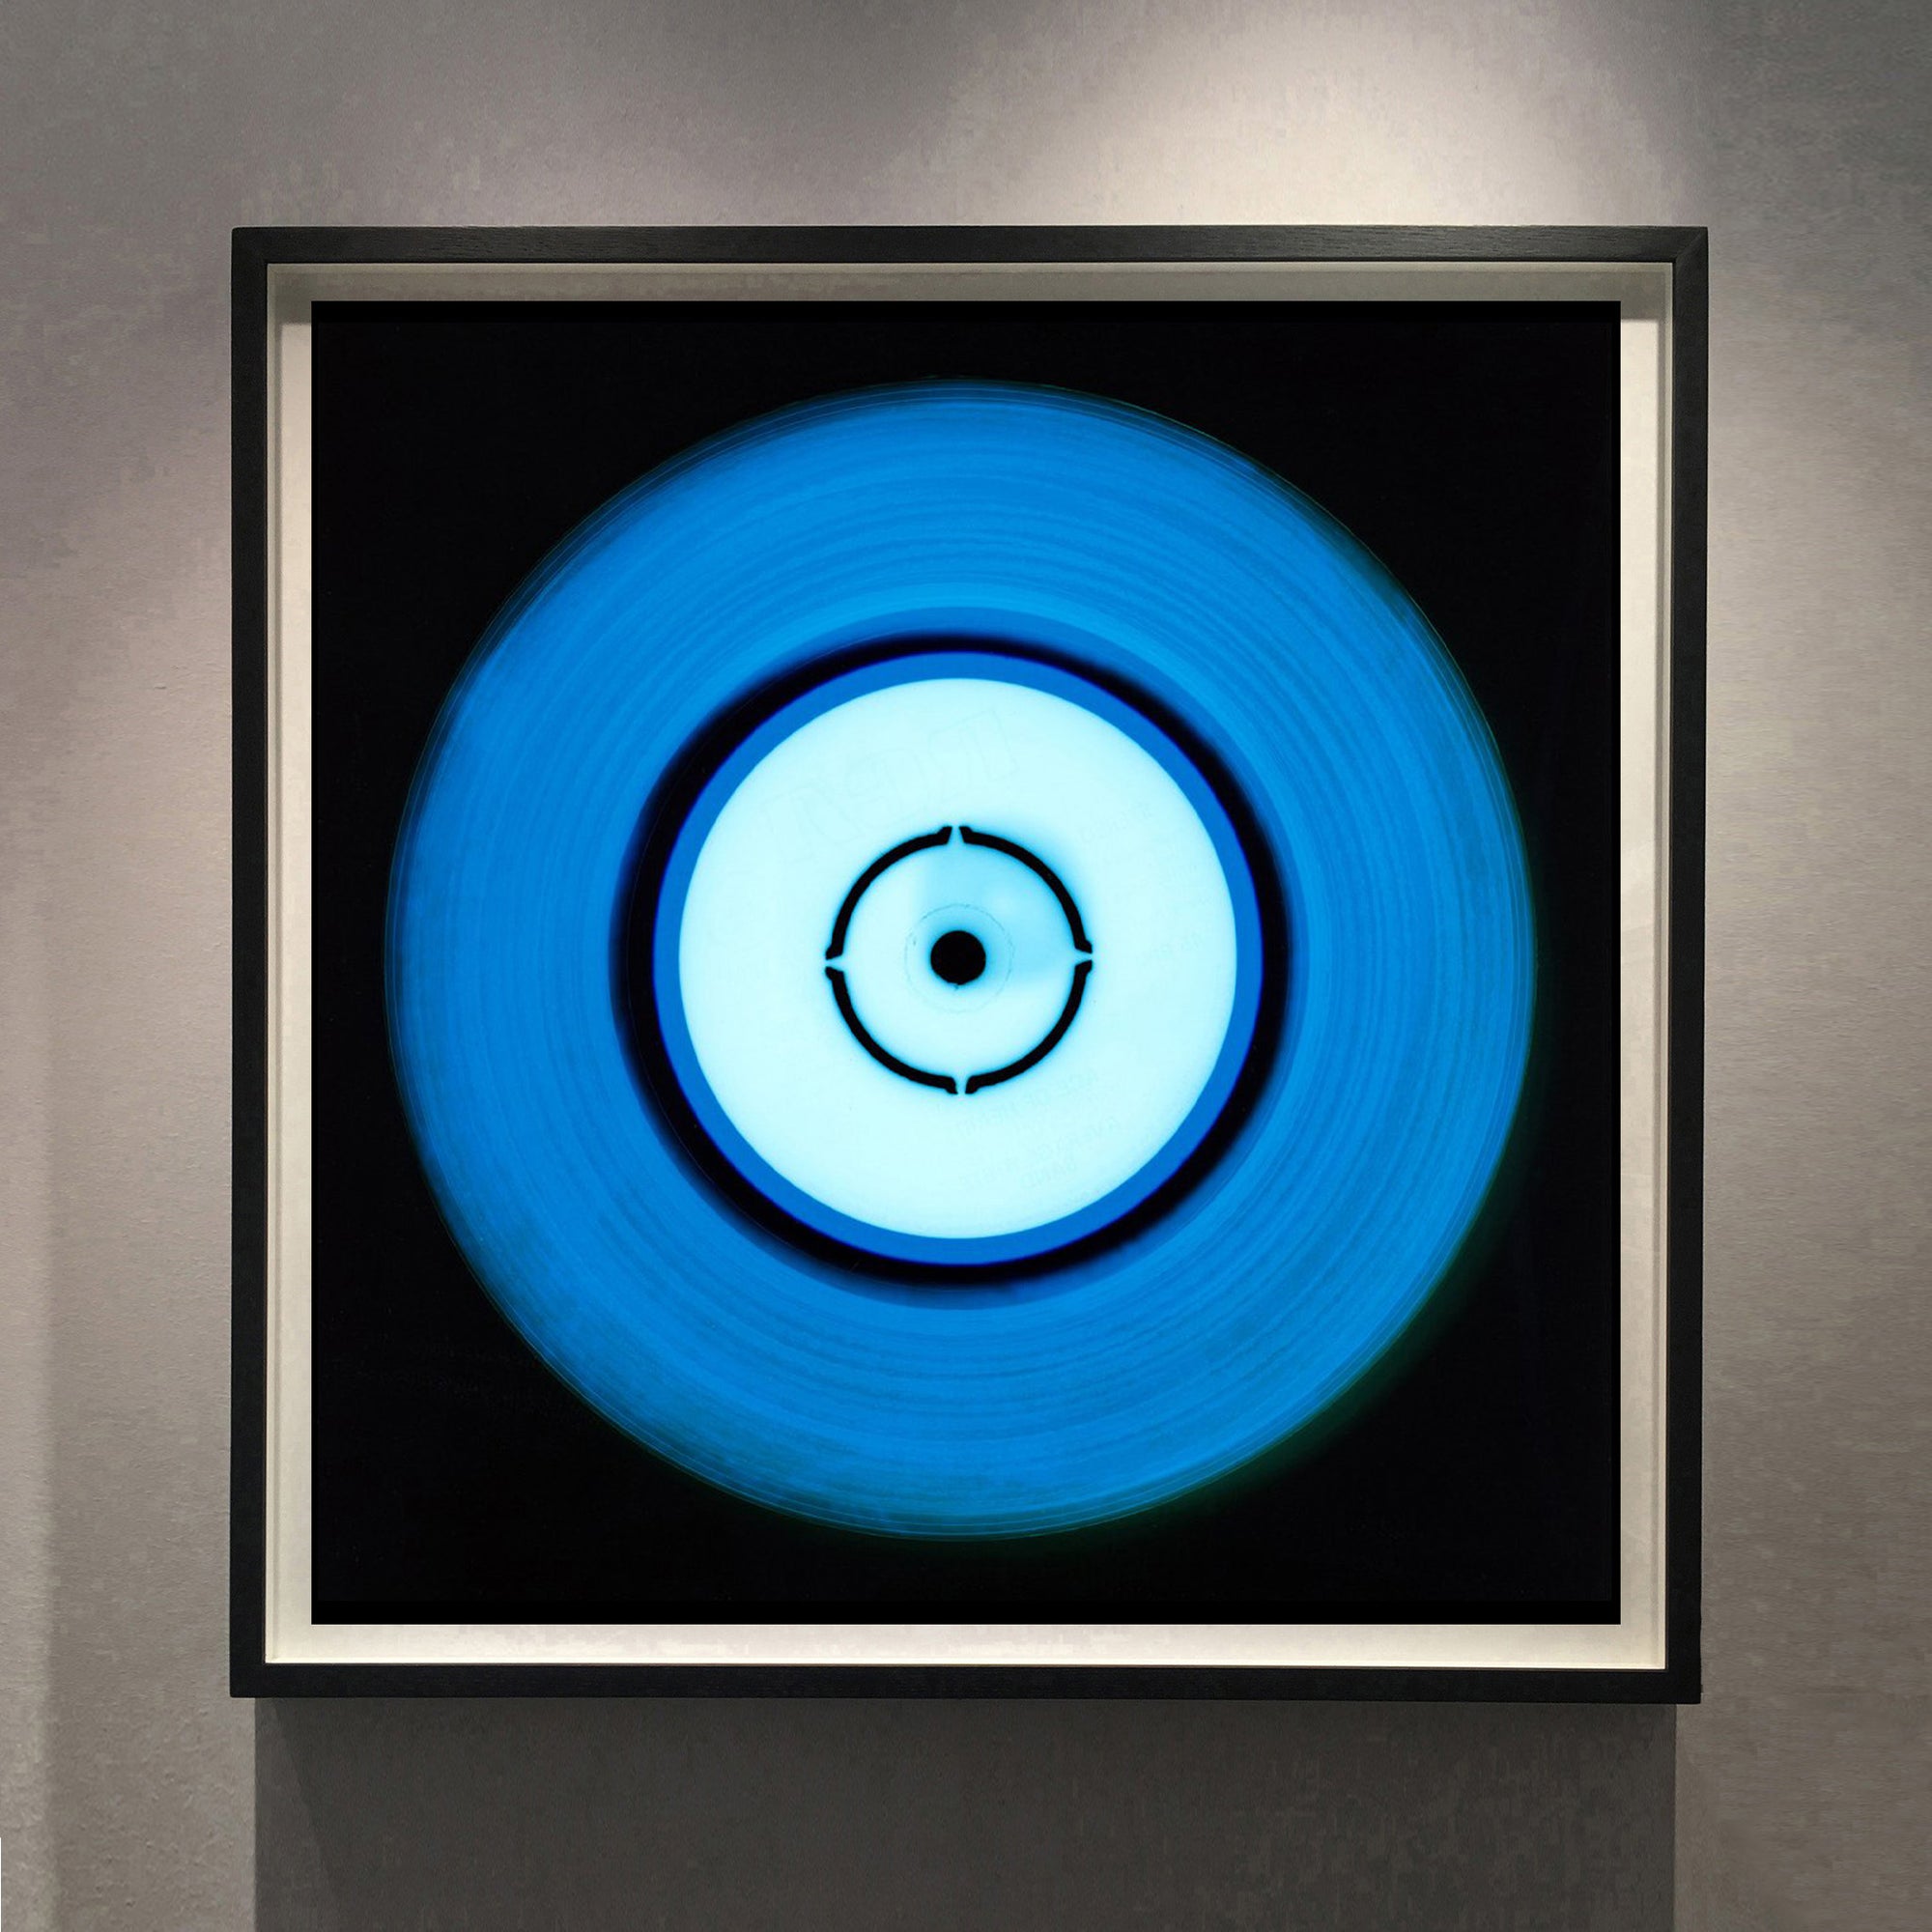 Vinyl Collection 'ACR', 2014. Acclaimed contemporary photographers, Richard Heeps and Natasha Heidler have collaborated to make this beautifully mesmerising collection. A celebration of the vinyl record and analogue technology, which reflects the artists practice within photography.